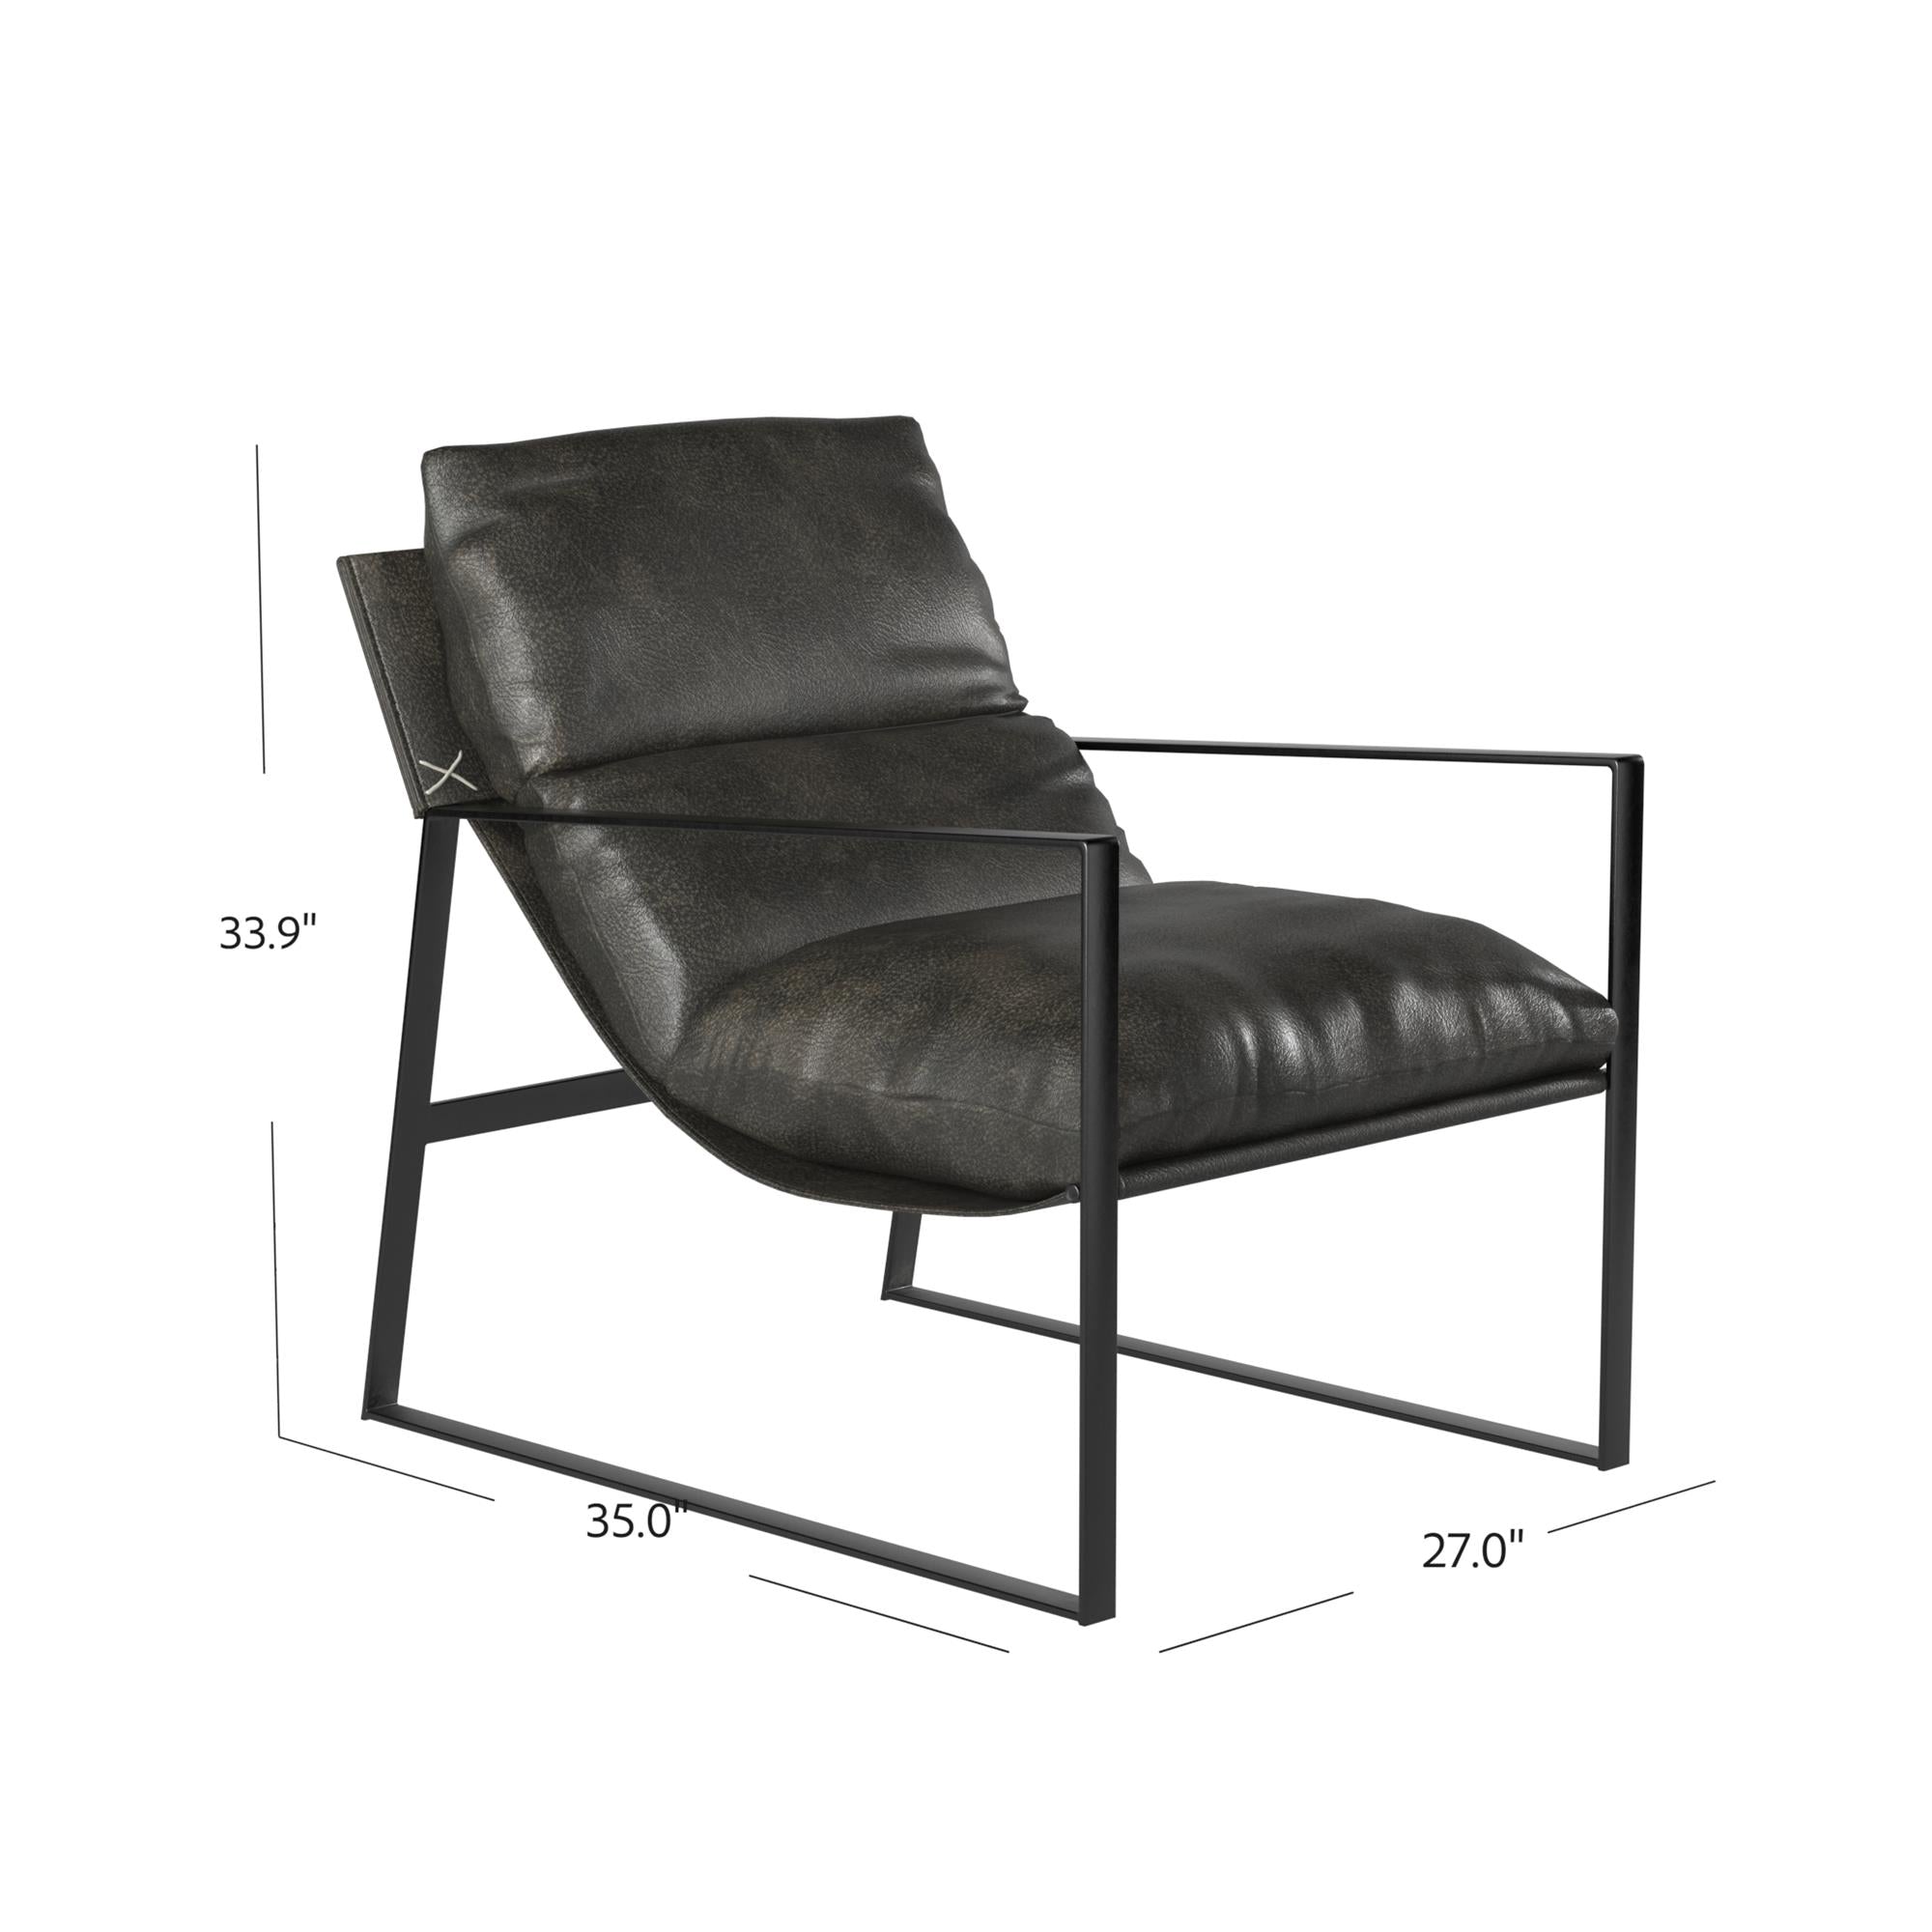  Varick Faux Leather Accent Chair - Espresso - N/A